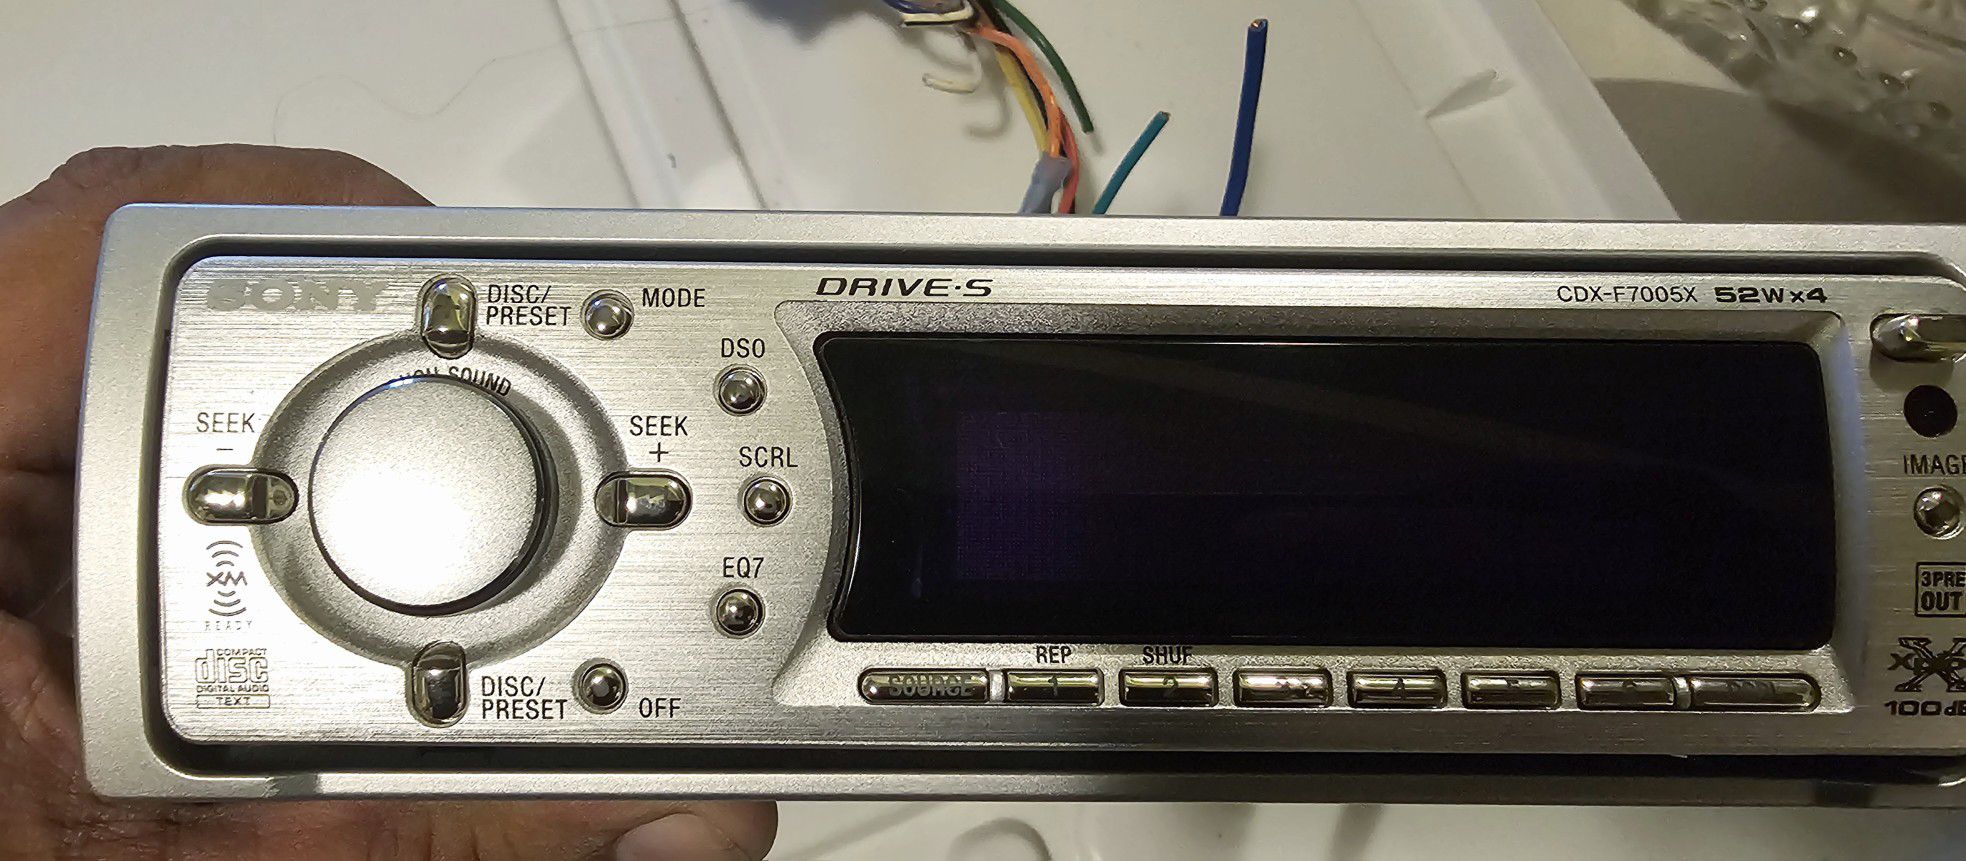 SONY classic car Stereo